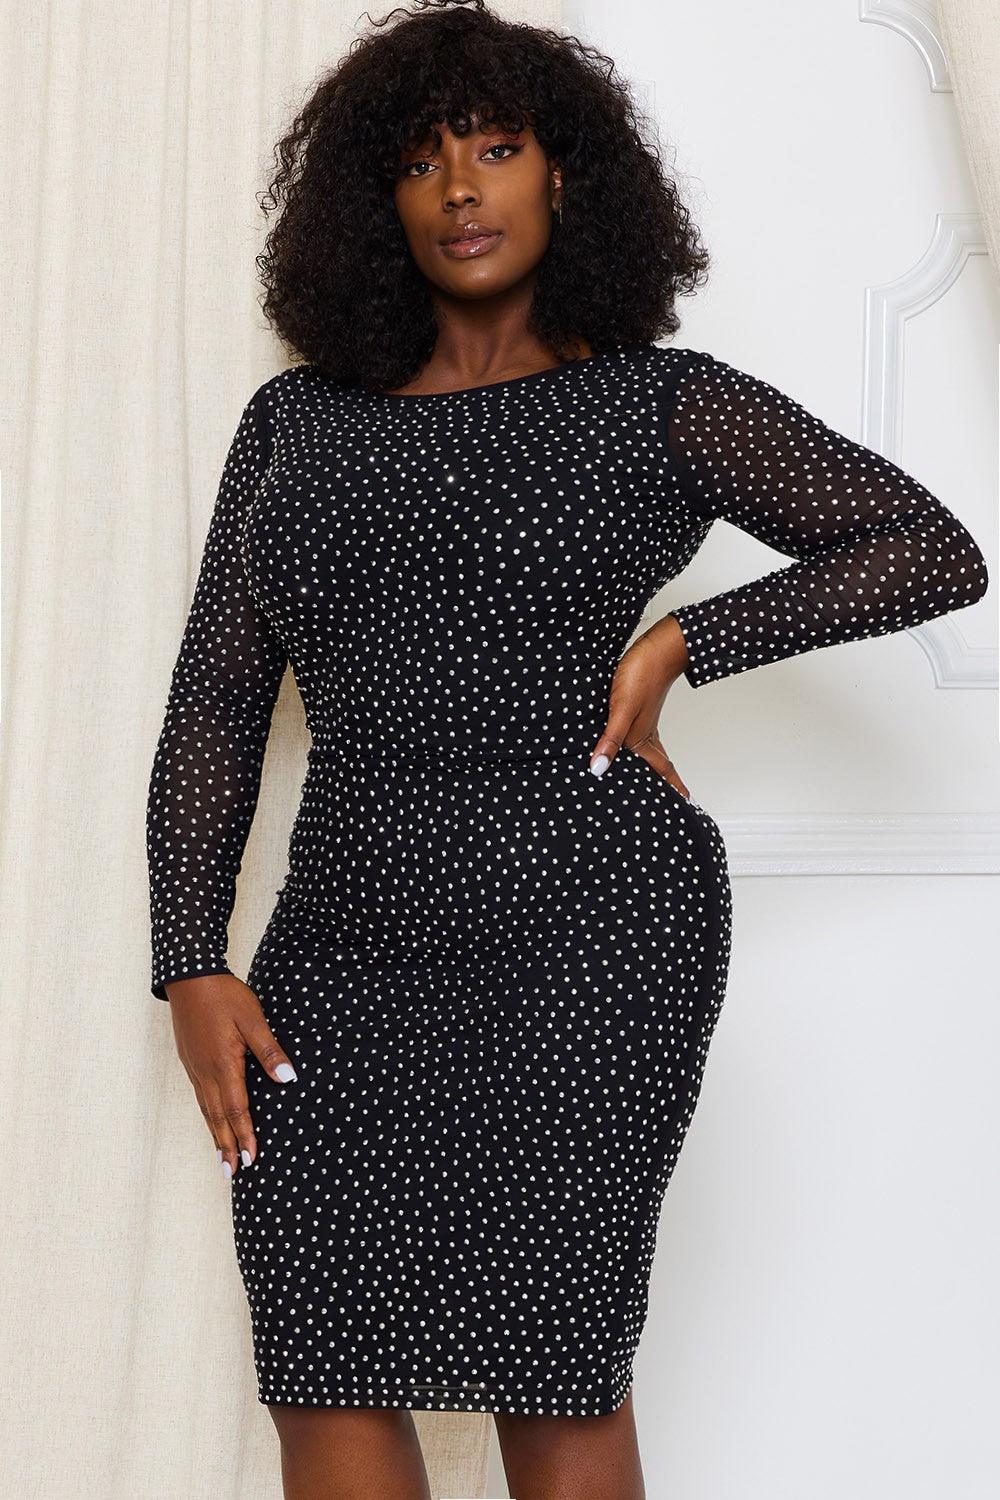 PLUS rhinestone studded sheer long sleeve midi dress - RK Collections Boutique